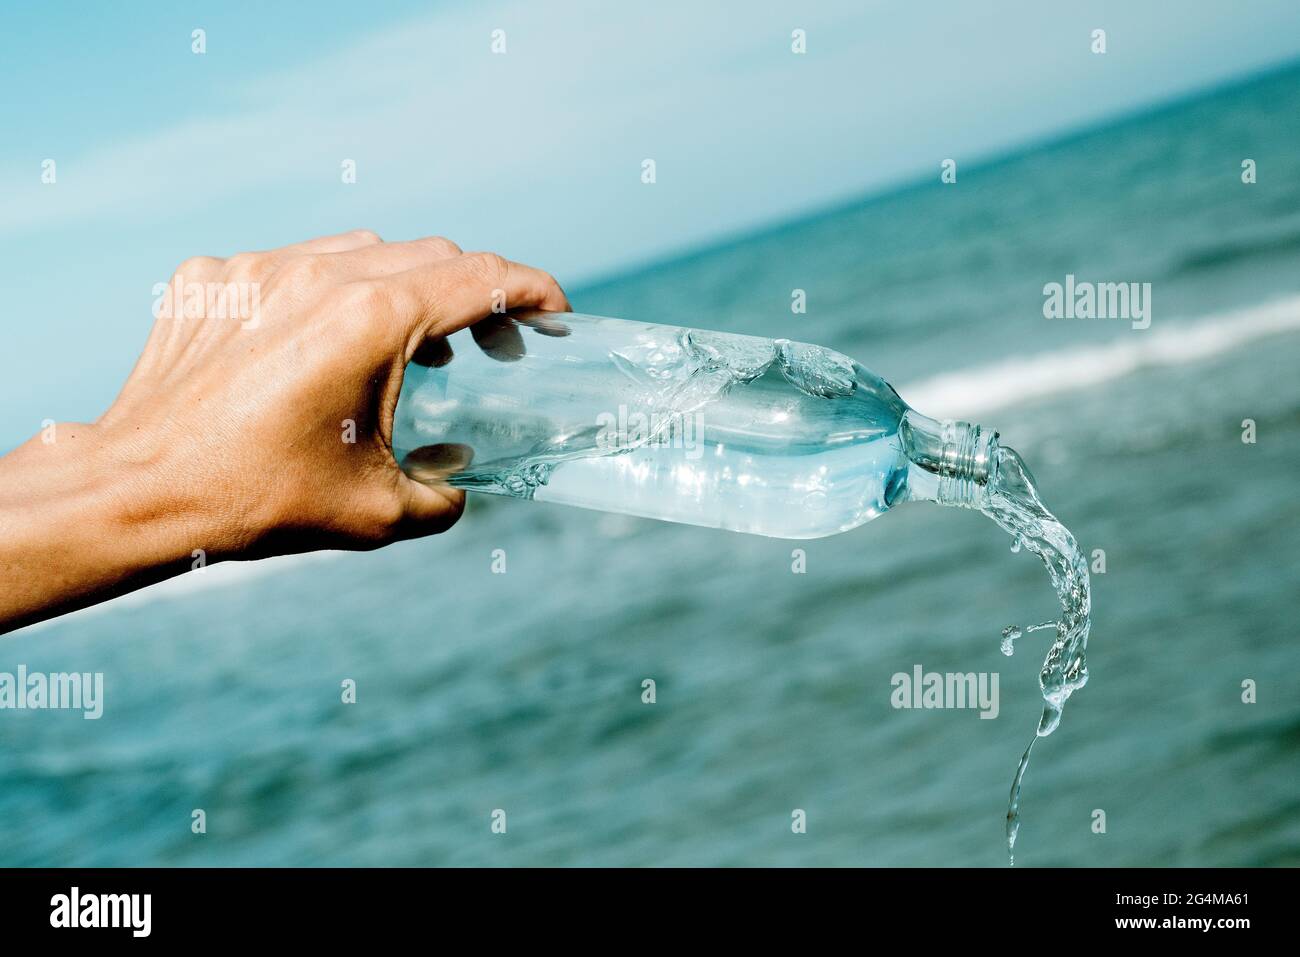 https://c8.alamy.com/comp/2G4MA61/a-young-caucasian-man-pours-water-from-a-glass-reusable-water-bottle-in-front-of-the-ocean-2G4MA61.jpg